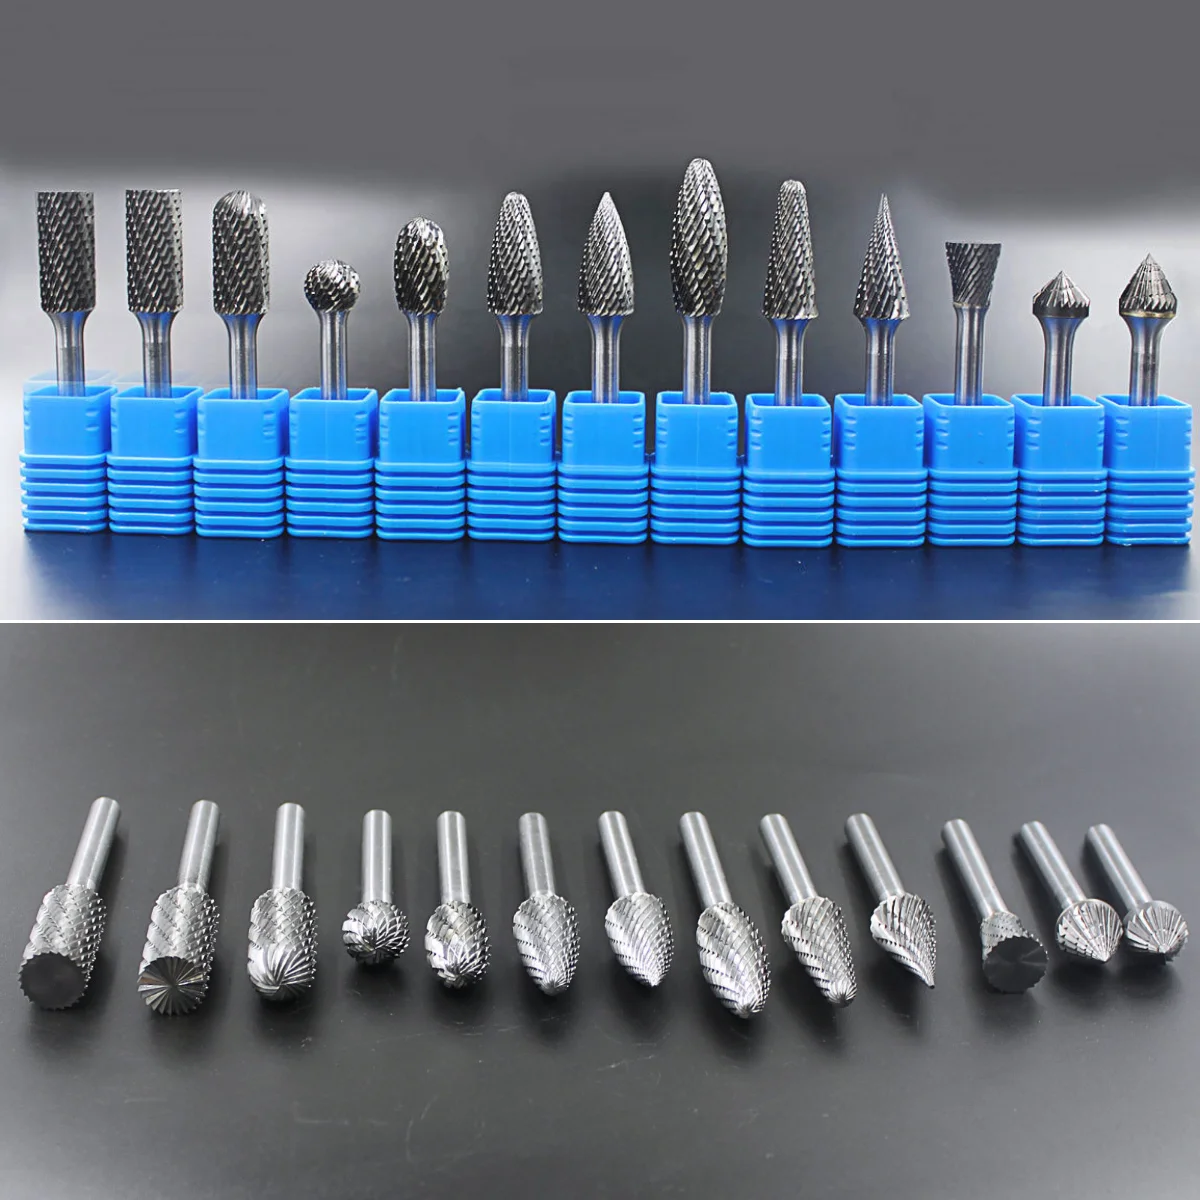 high quality factory 6mm 6.35mm Carbide Burr 1/4" ShankTungsten Double Cut Rotary Die Grinder Bits - Cutting Burrs For Fordom, Dewalt, Milwaukee And Die Grinder Accessories - Wood Carving Metal Working Sturdy Storage Case set